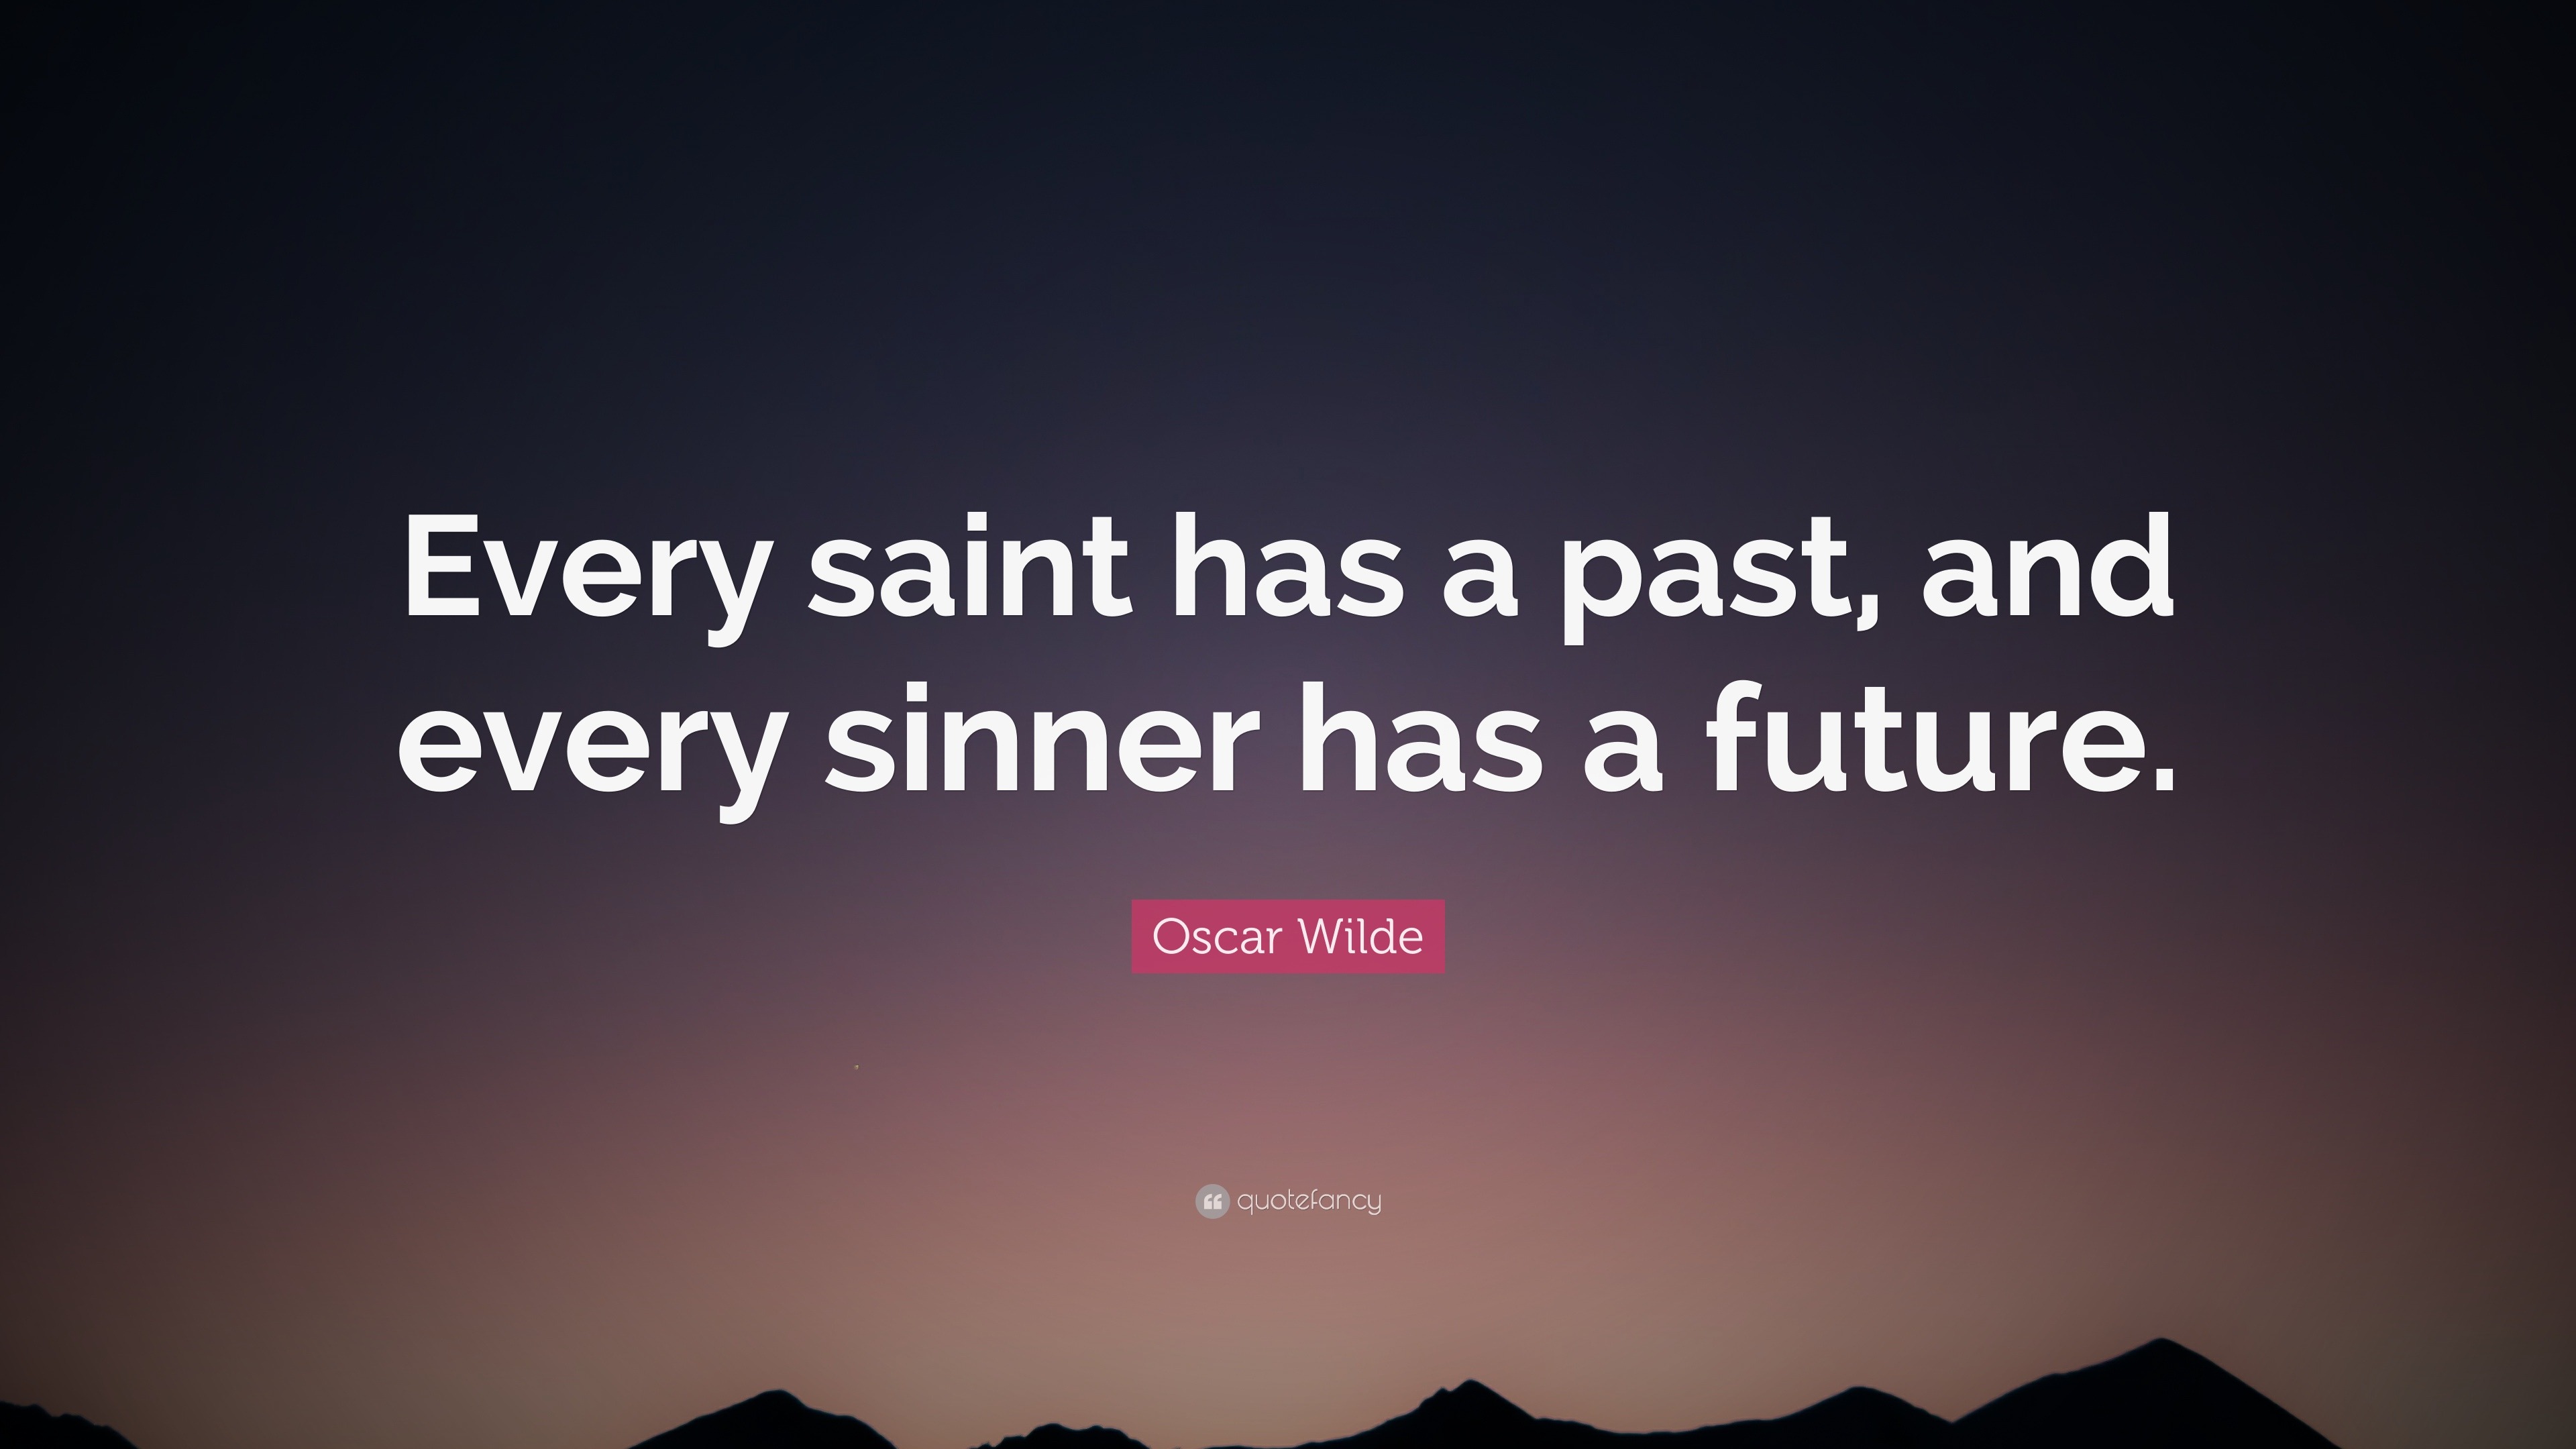 Oscar Wilde Quote: “Every saint has a past, and every sinner has a future.”